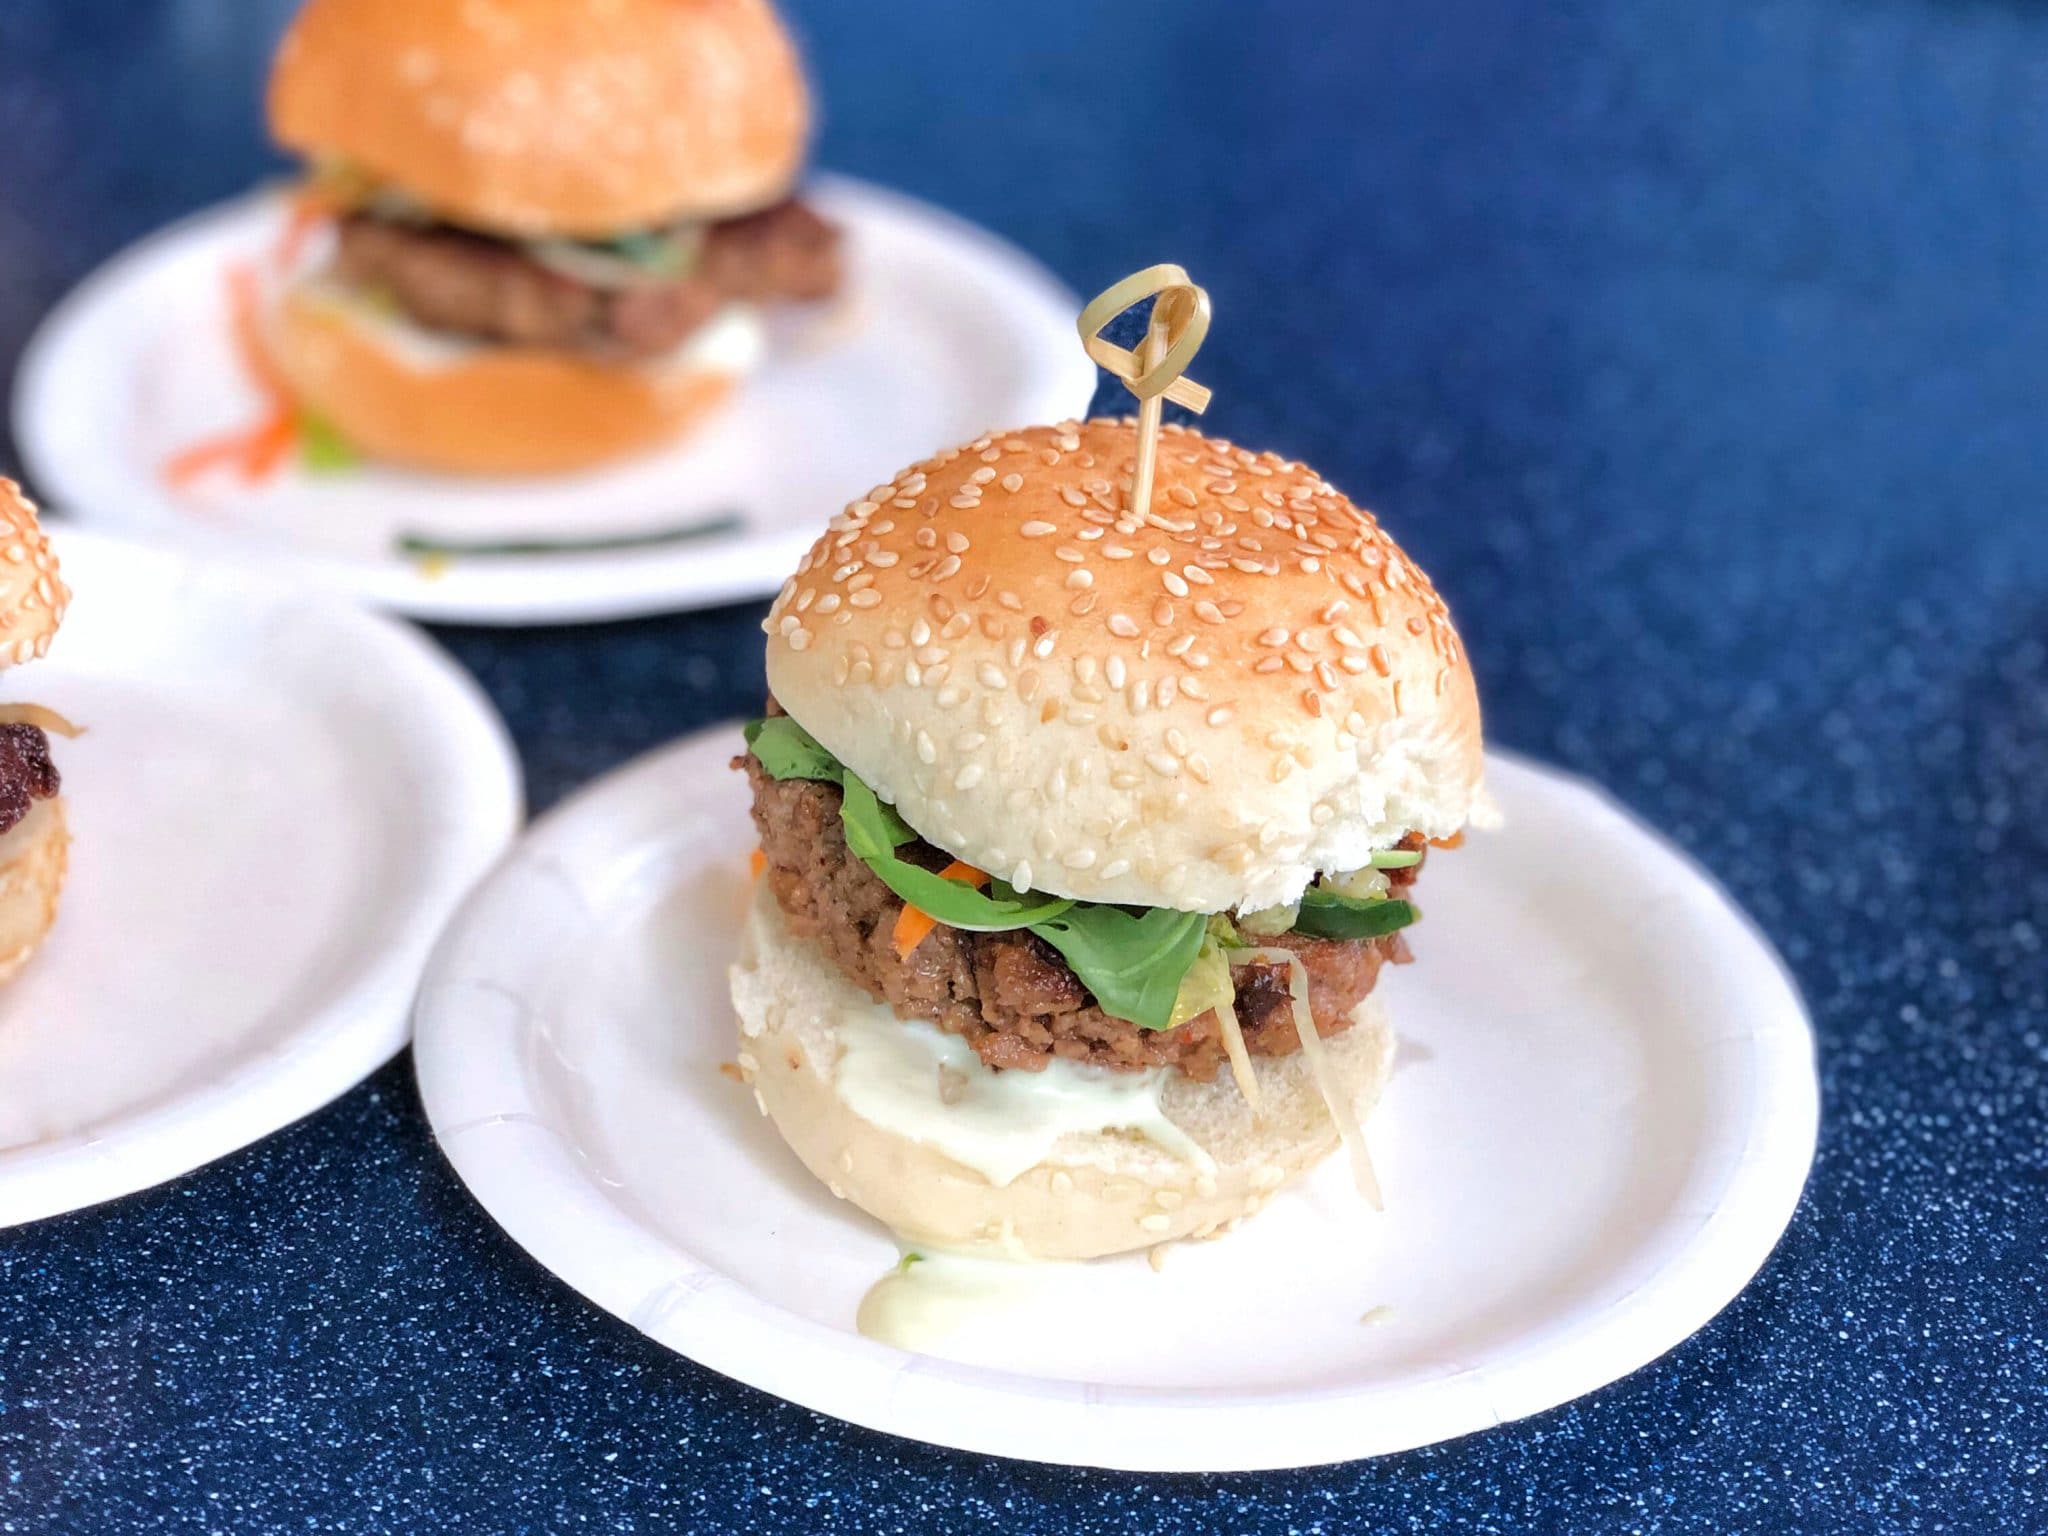 The Impossible Burger Slider at the 2019 Epcot International Food and Wine Festival at Walt Disney World